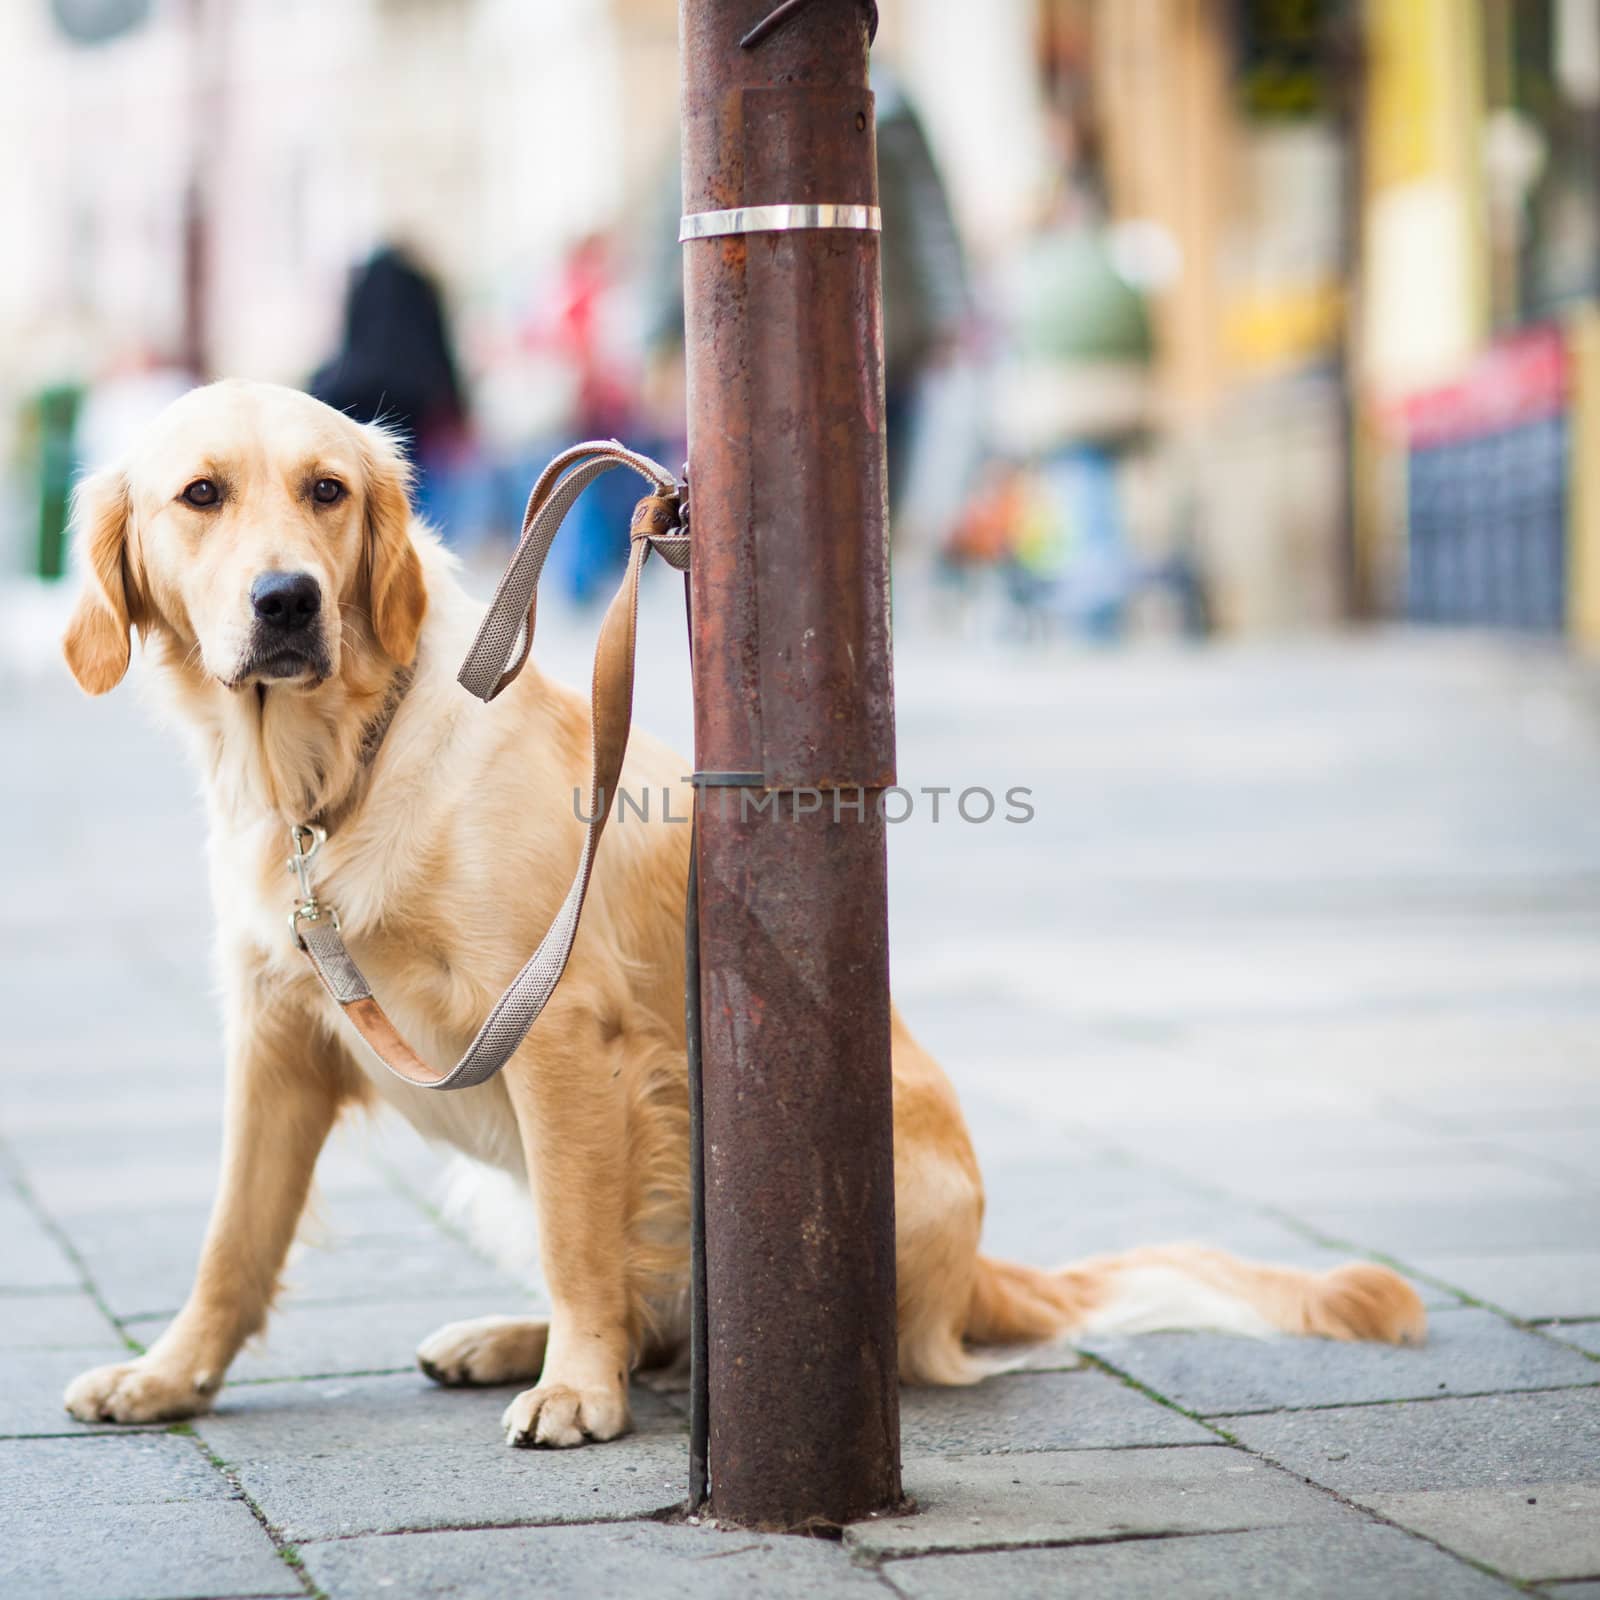 Cute dog waiting patiently for his master on a city street by viktor_cap